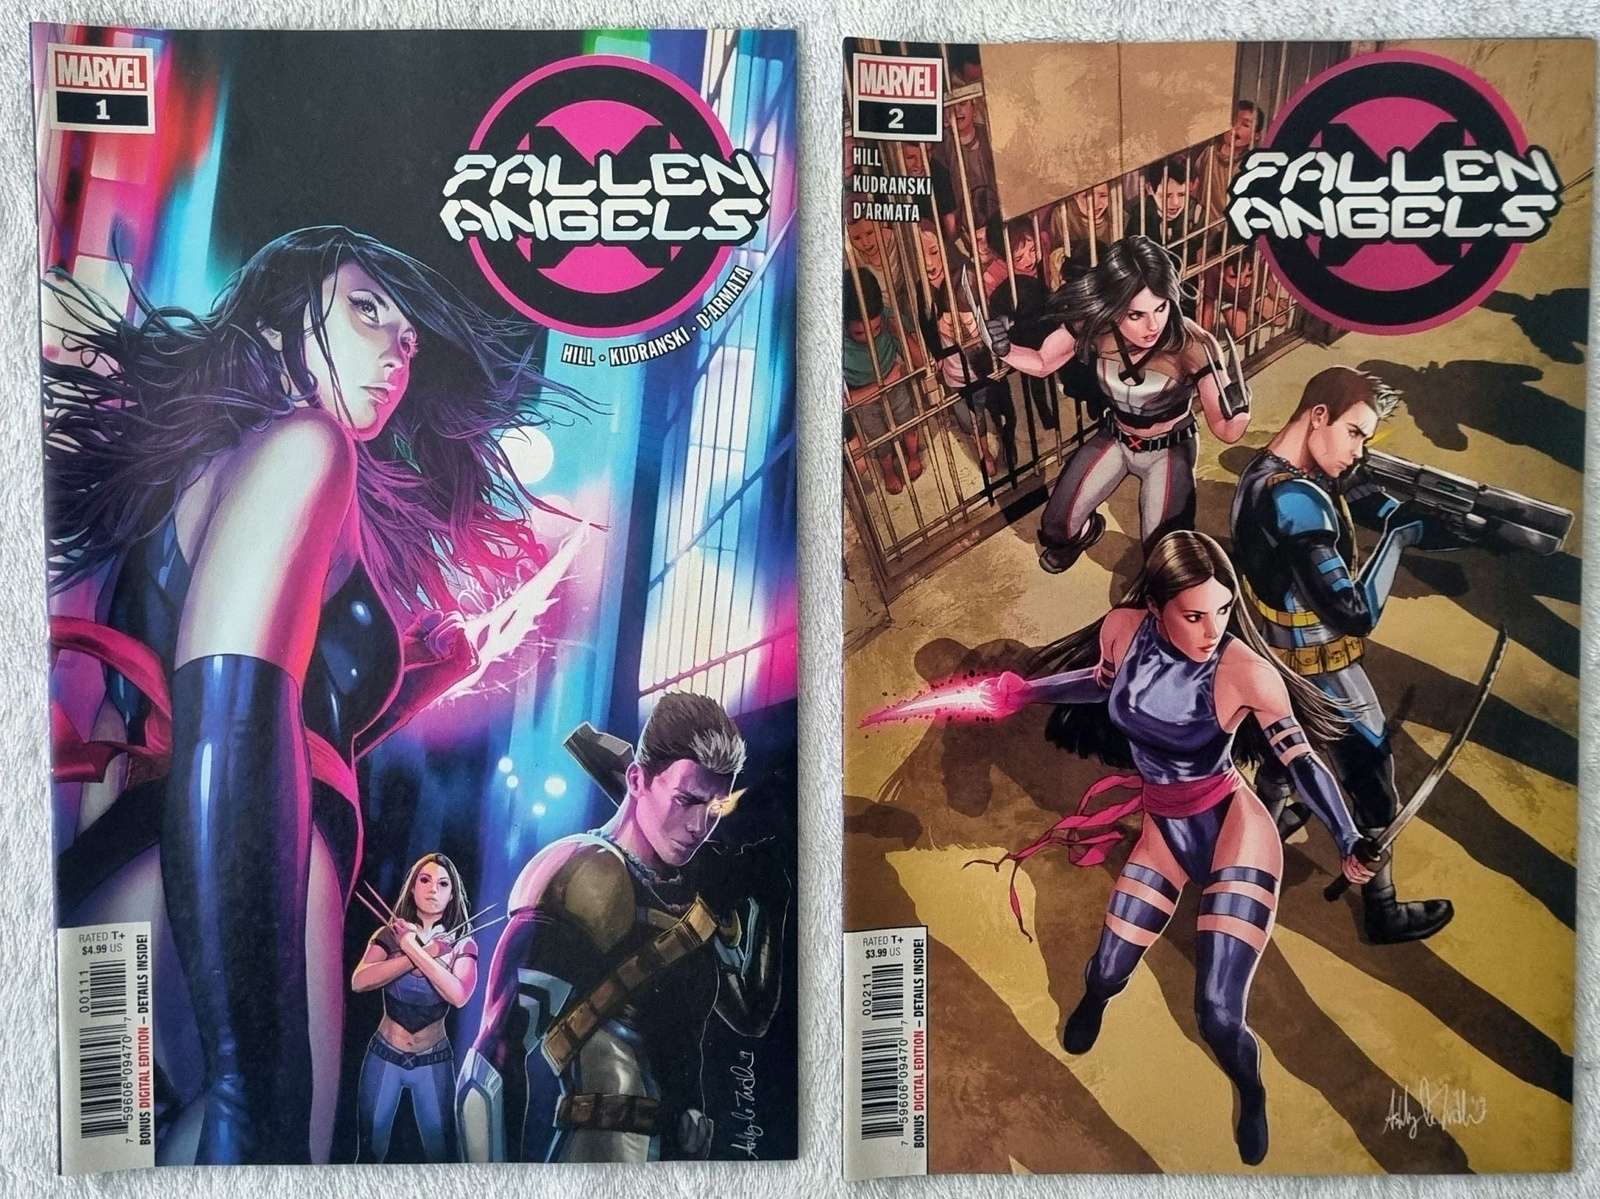 Fallen Angels Issues 1 & 2 - NM